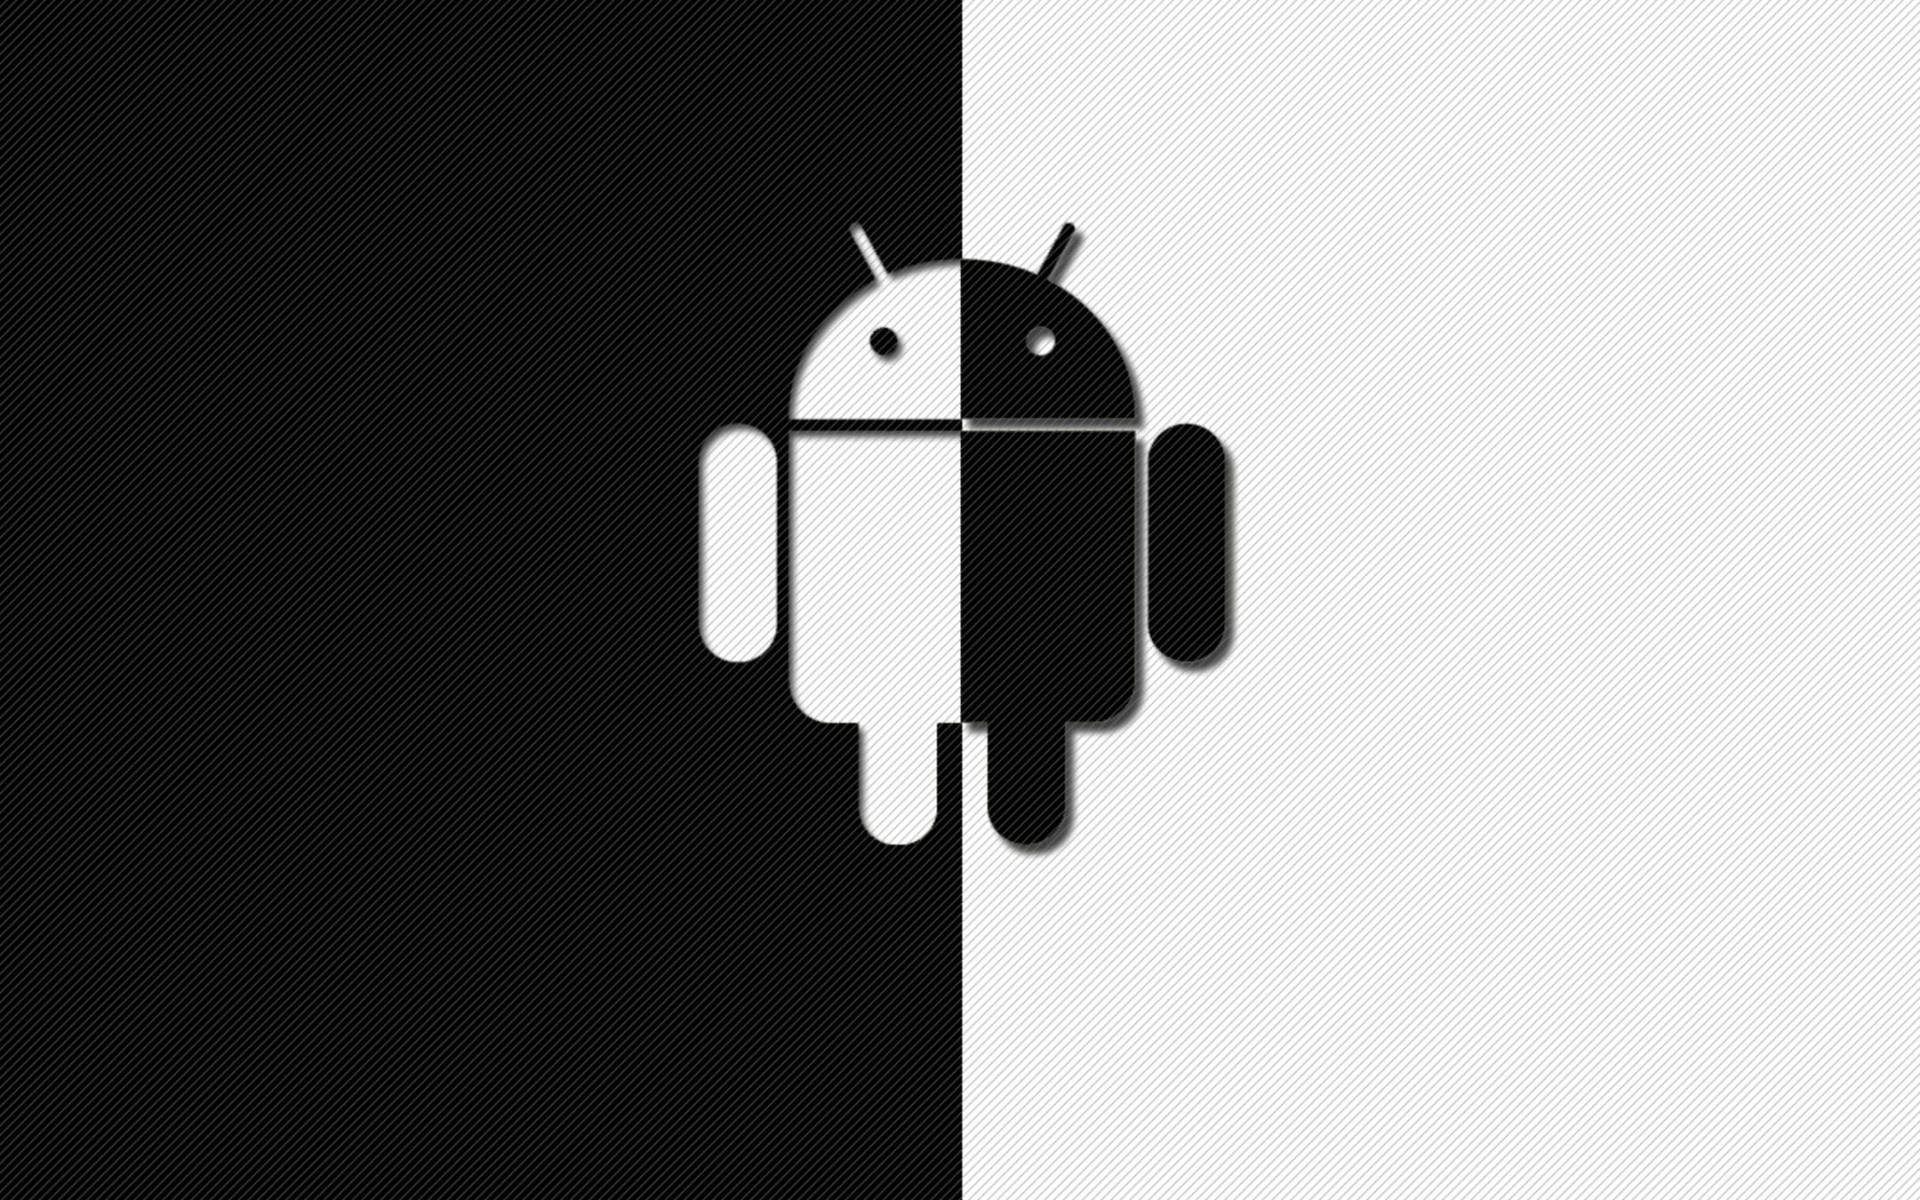 B&w Android Desktop Background